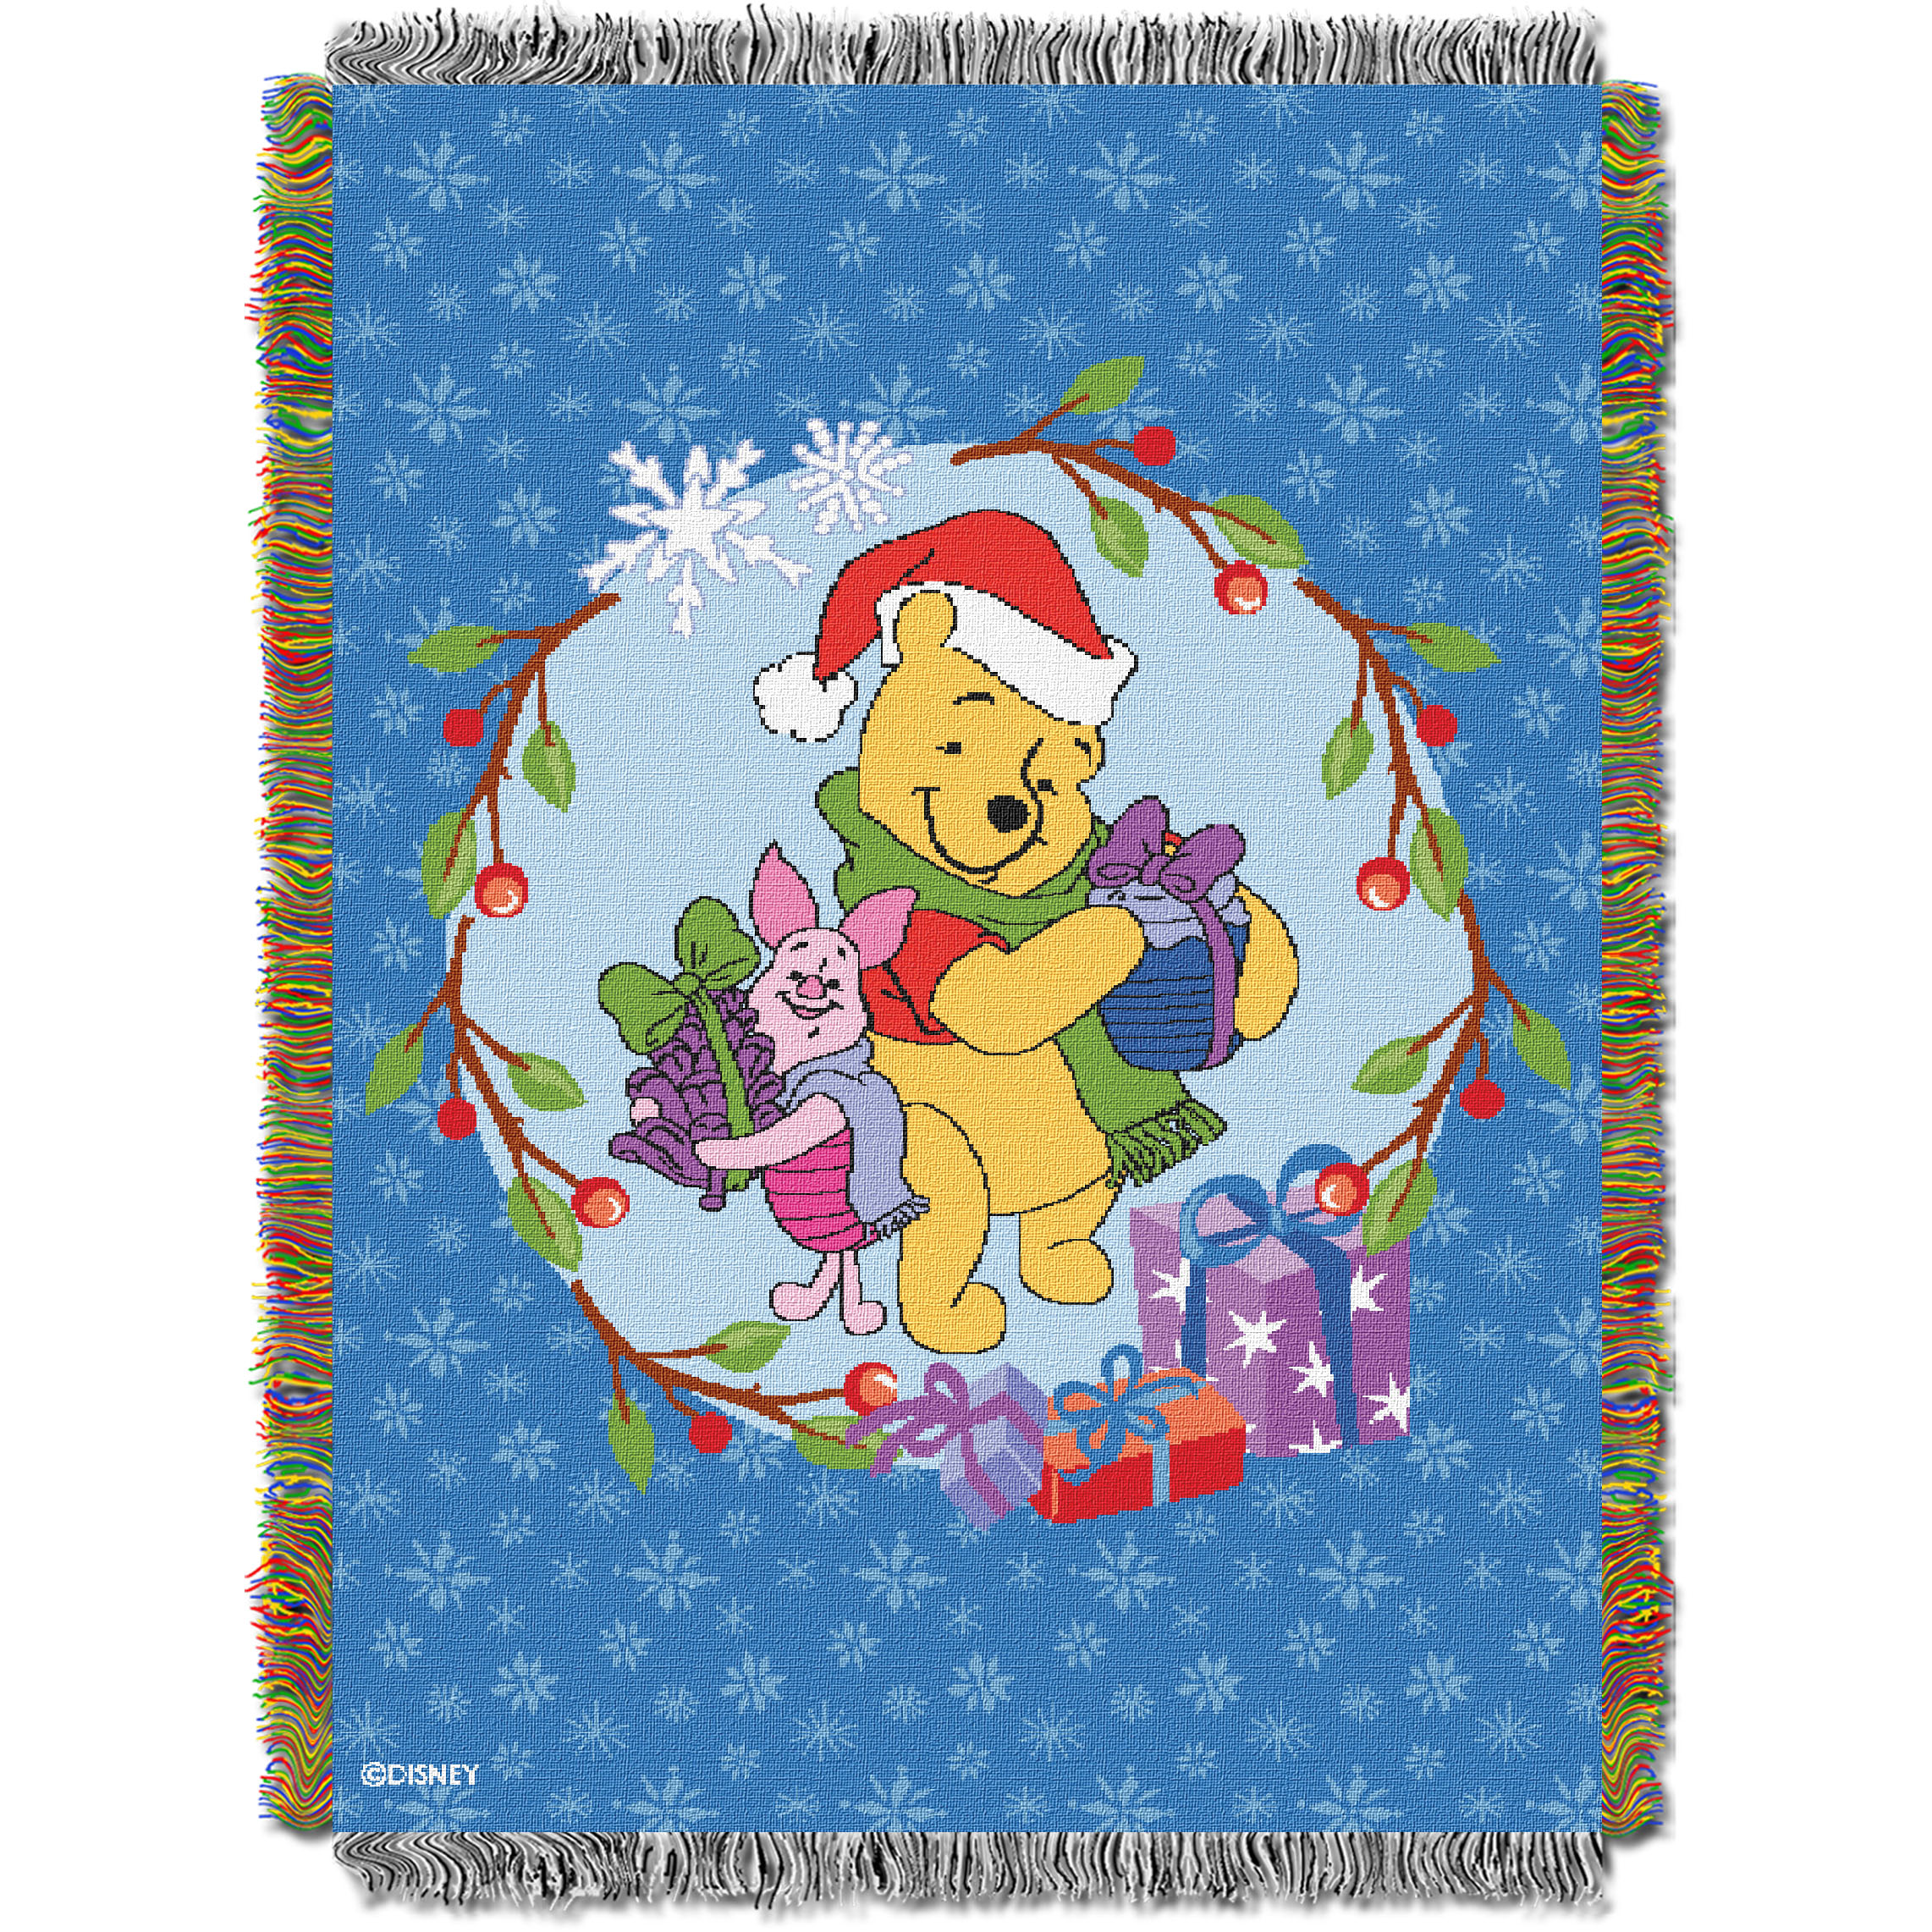 Winnie The Pooh Homemade Woven Tapestry Throw Blanket - image 1 of 2